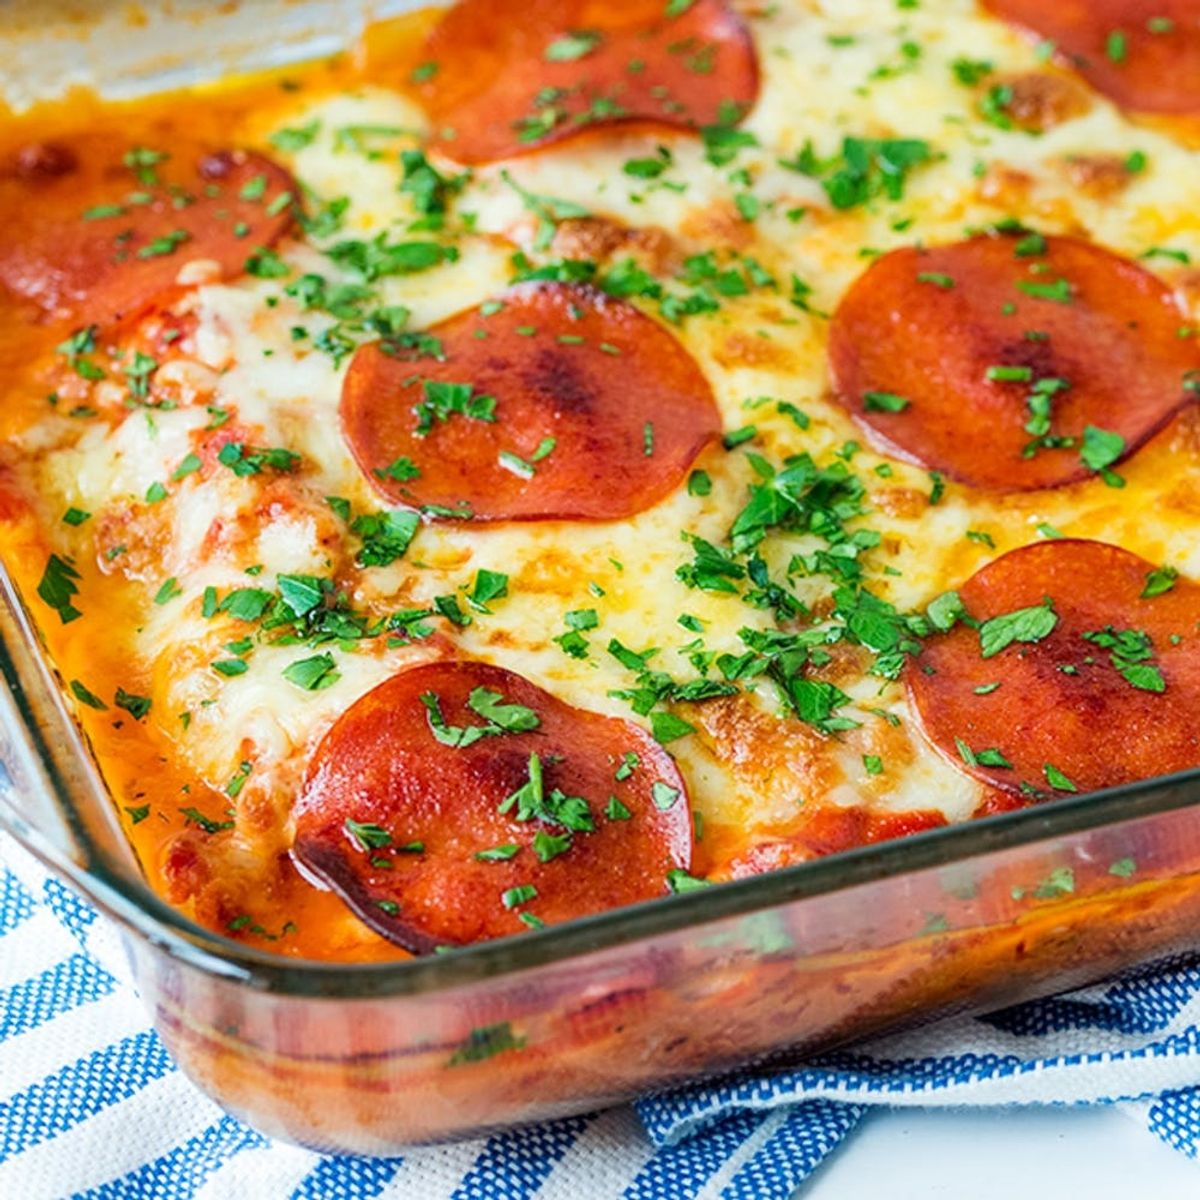 Get That Pizza Fix Minus the Carbs With This Chicken Pepperoni Casserole